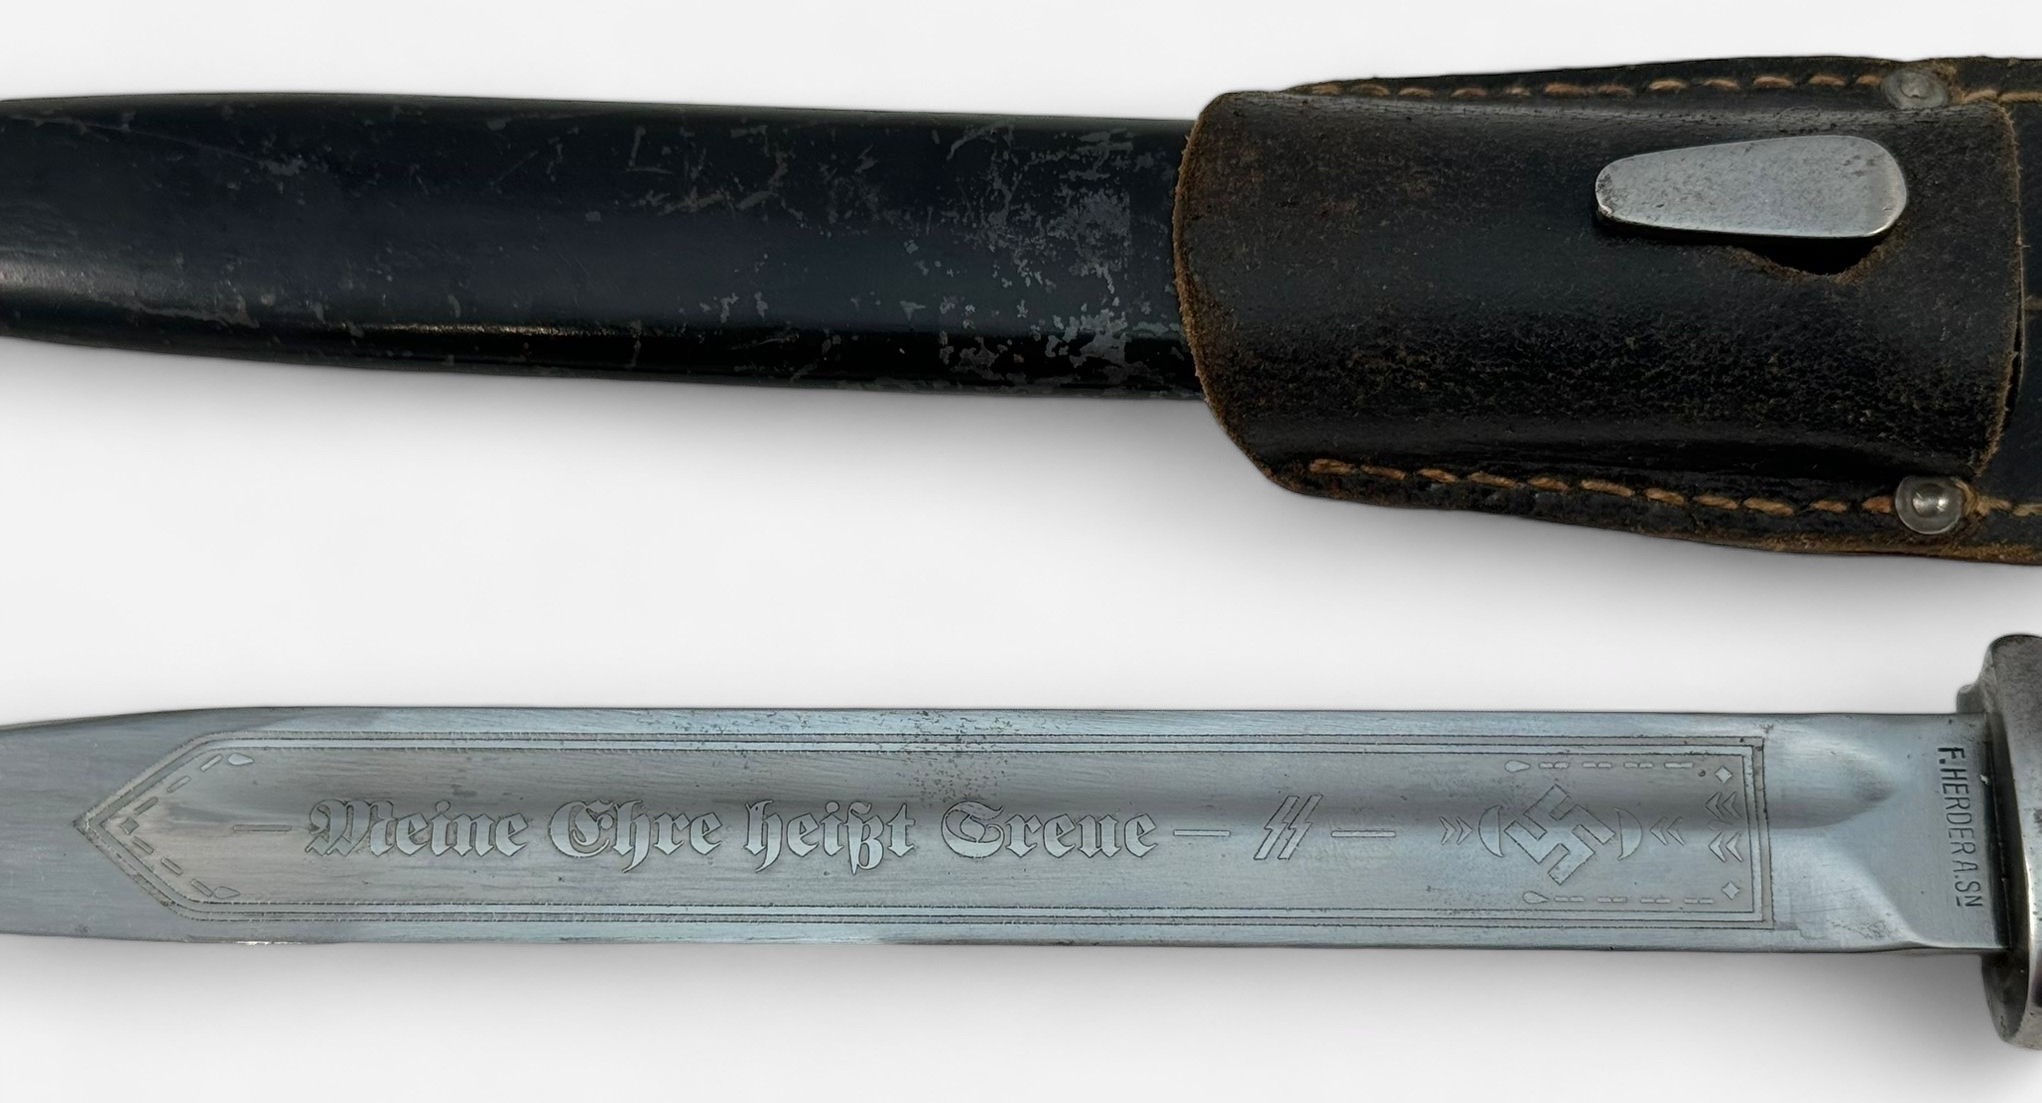 A WWII German Waffen SS bayonet, 25cm fullered blade, etched 'meine ehre heißt treue' (my honour - Image 4 of 4